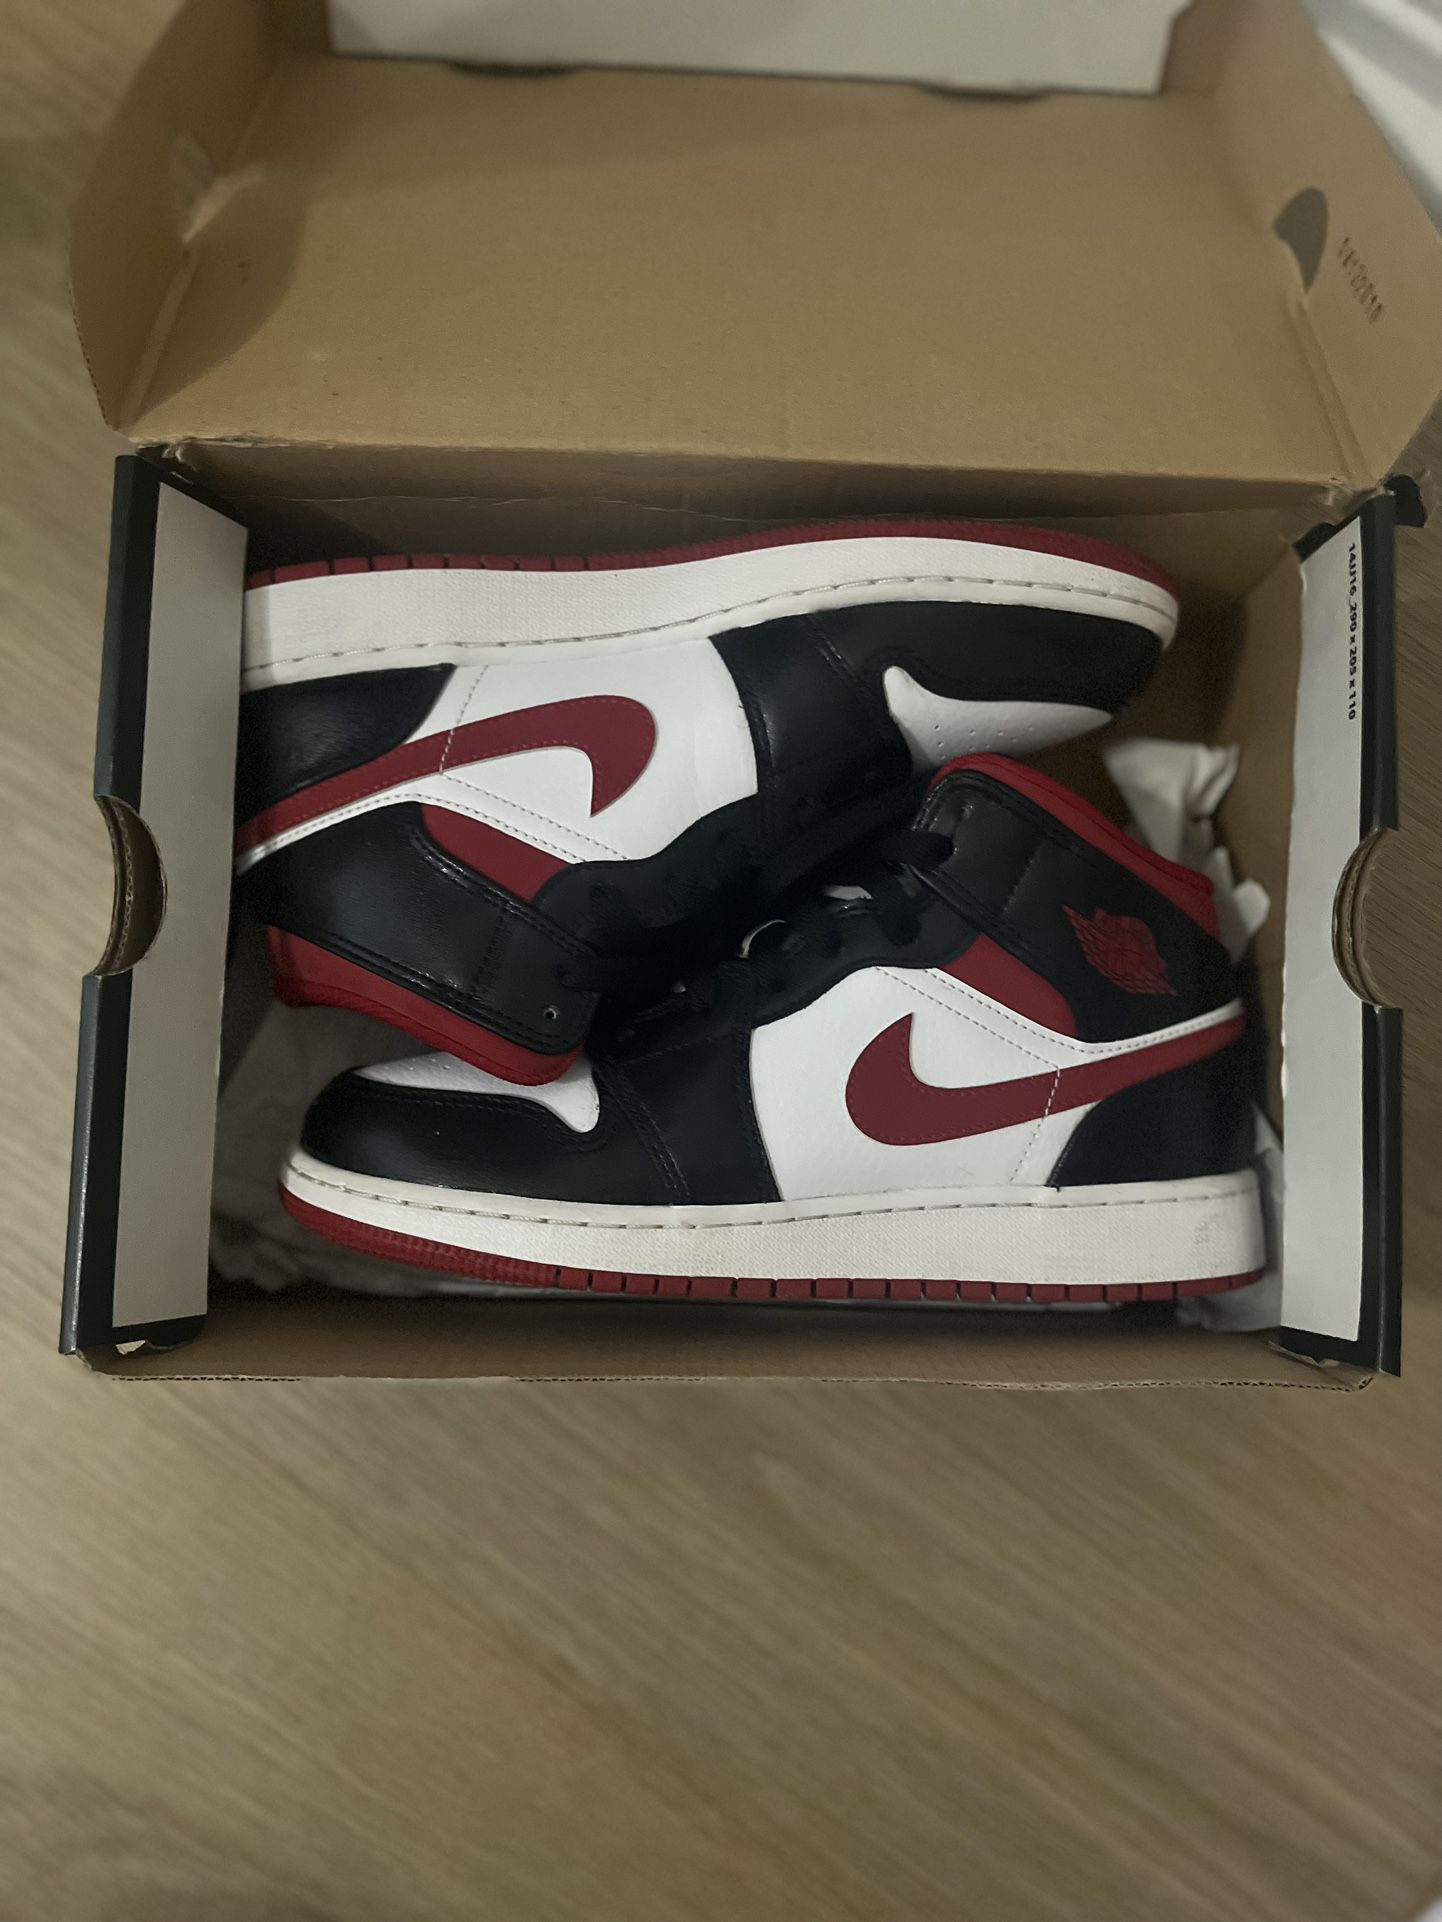 Air Jordan 1 Mid Black Gym Red Size 5.5 YOUTH With Crease Protection